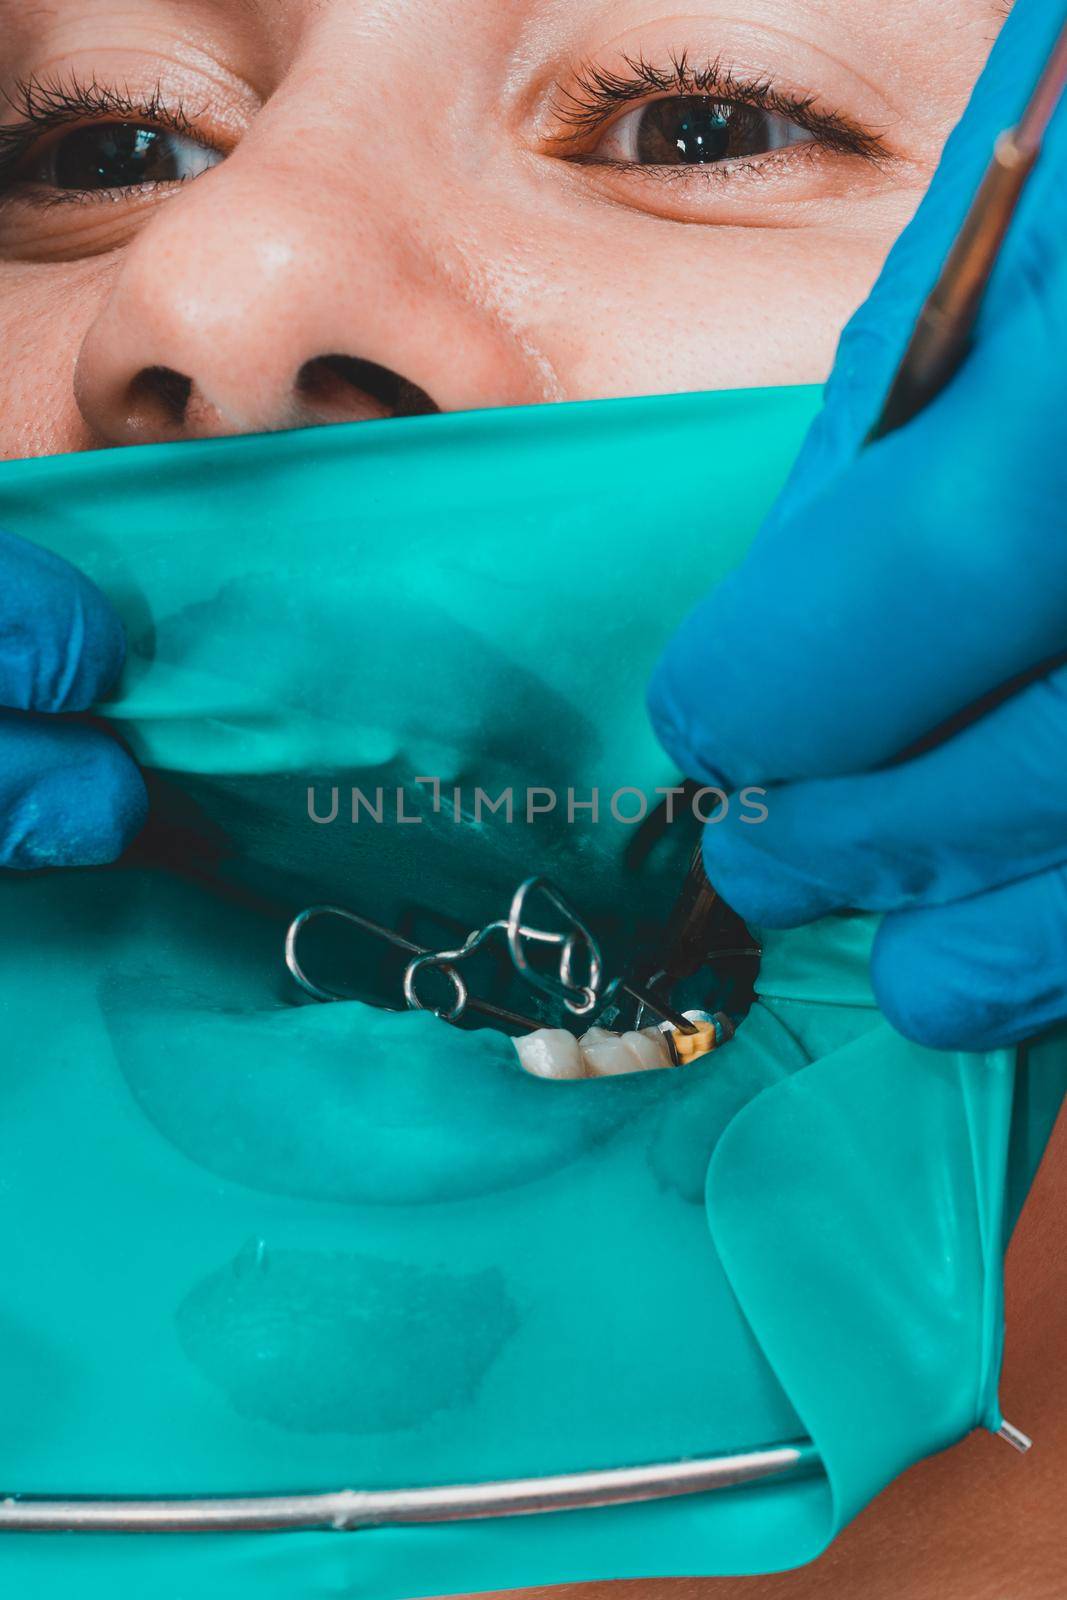 A patient at a dentist's appointment, a doctor uses a rubber dam to treat teeth, disinfects a tooth for filling.2020